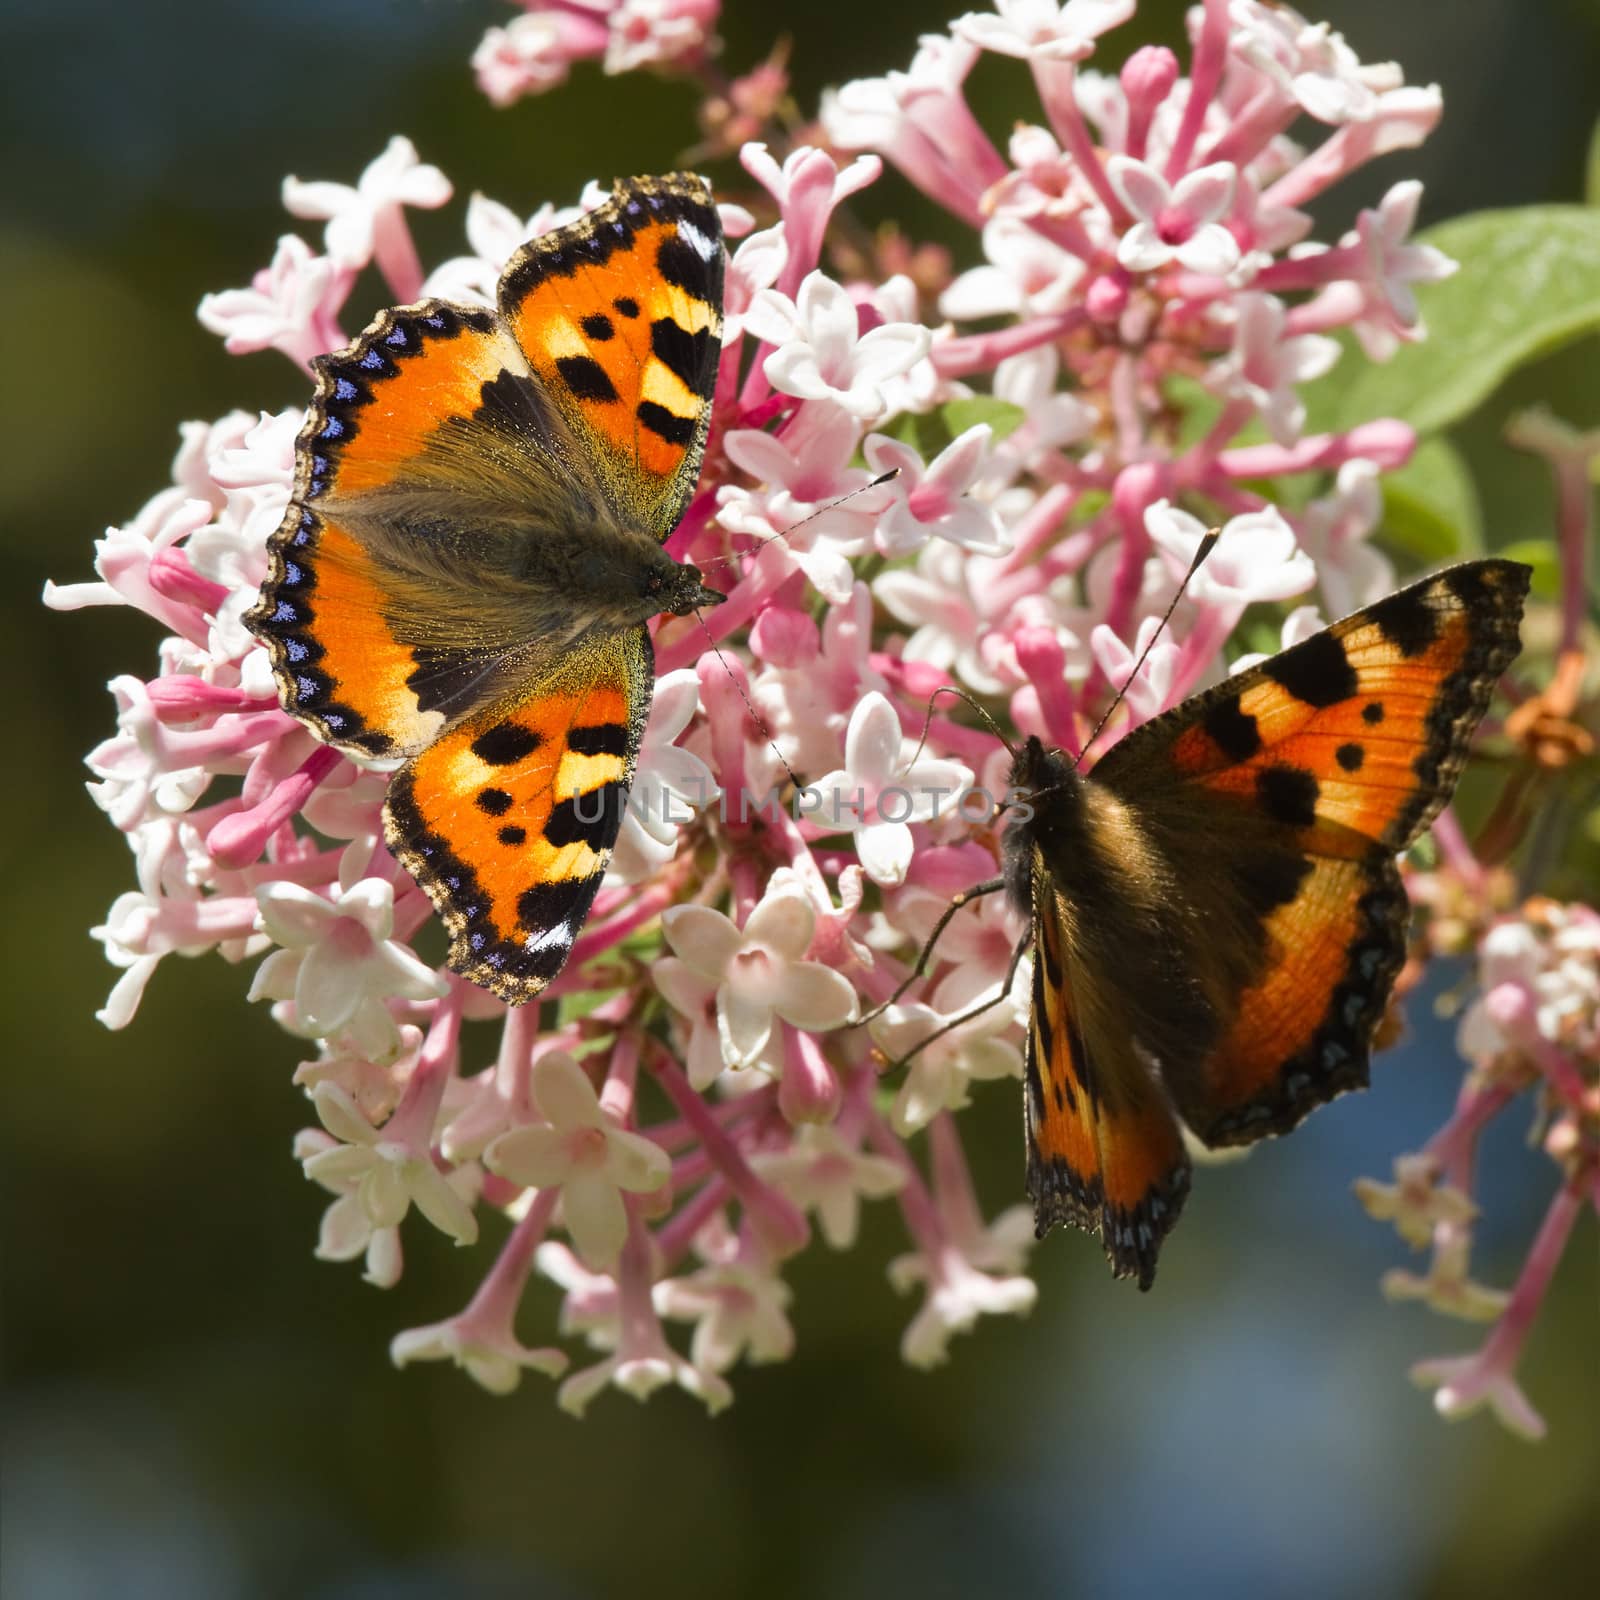 Small tortoiseshell butterflies on Syringa flowers by Colette